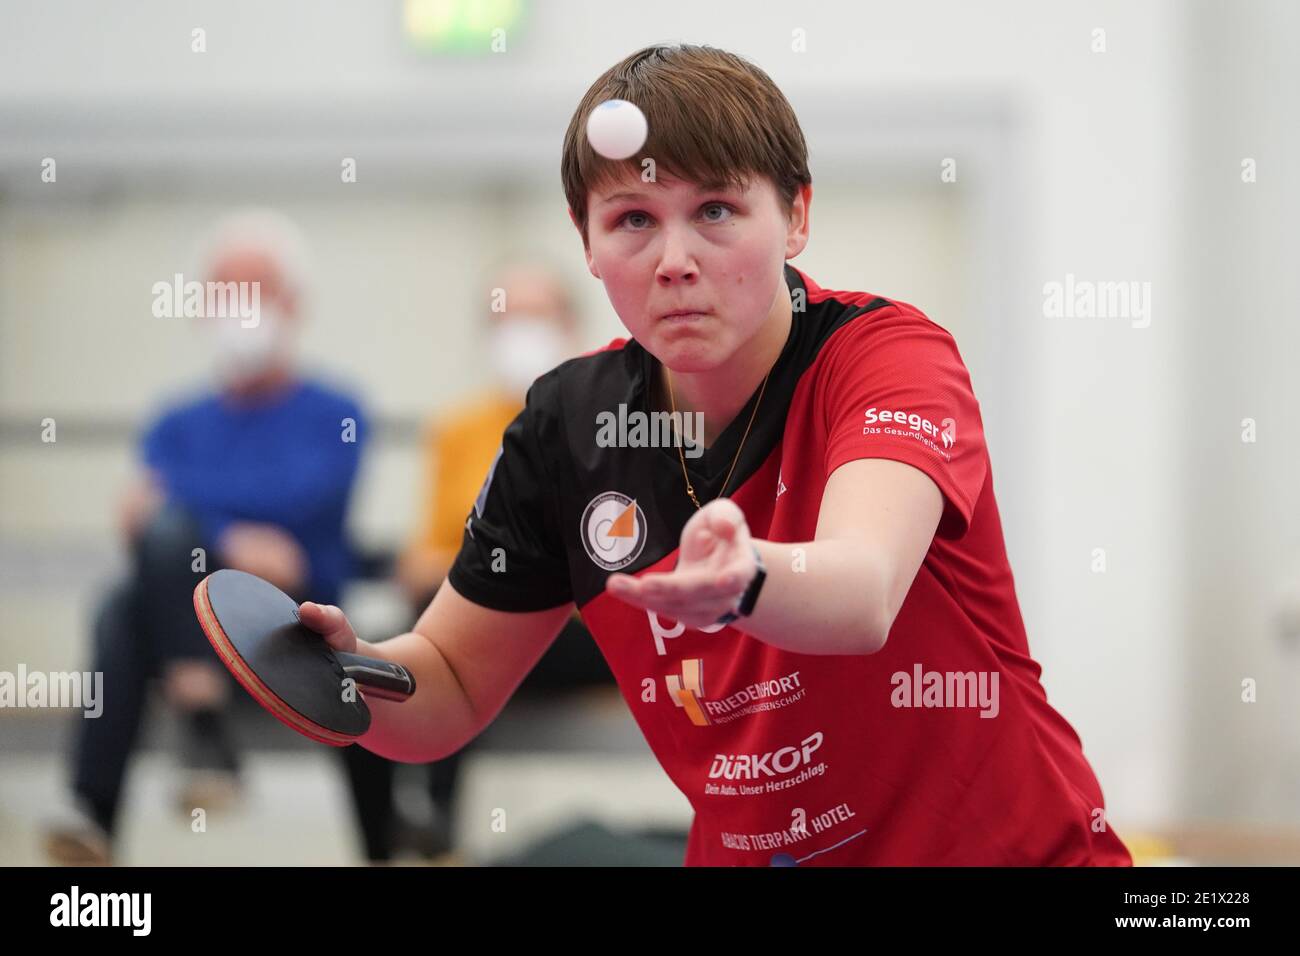 Berlin, Germany. 10th Jan, 2021. Nina Mittelham of ttc berlin eastside hits  the ball against S. Klee of ESV Weil Tischtennis in the semi-finals of the  German Women's Table Tennis Cup Championships.